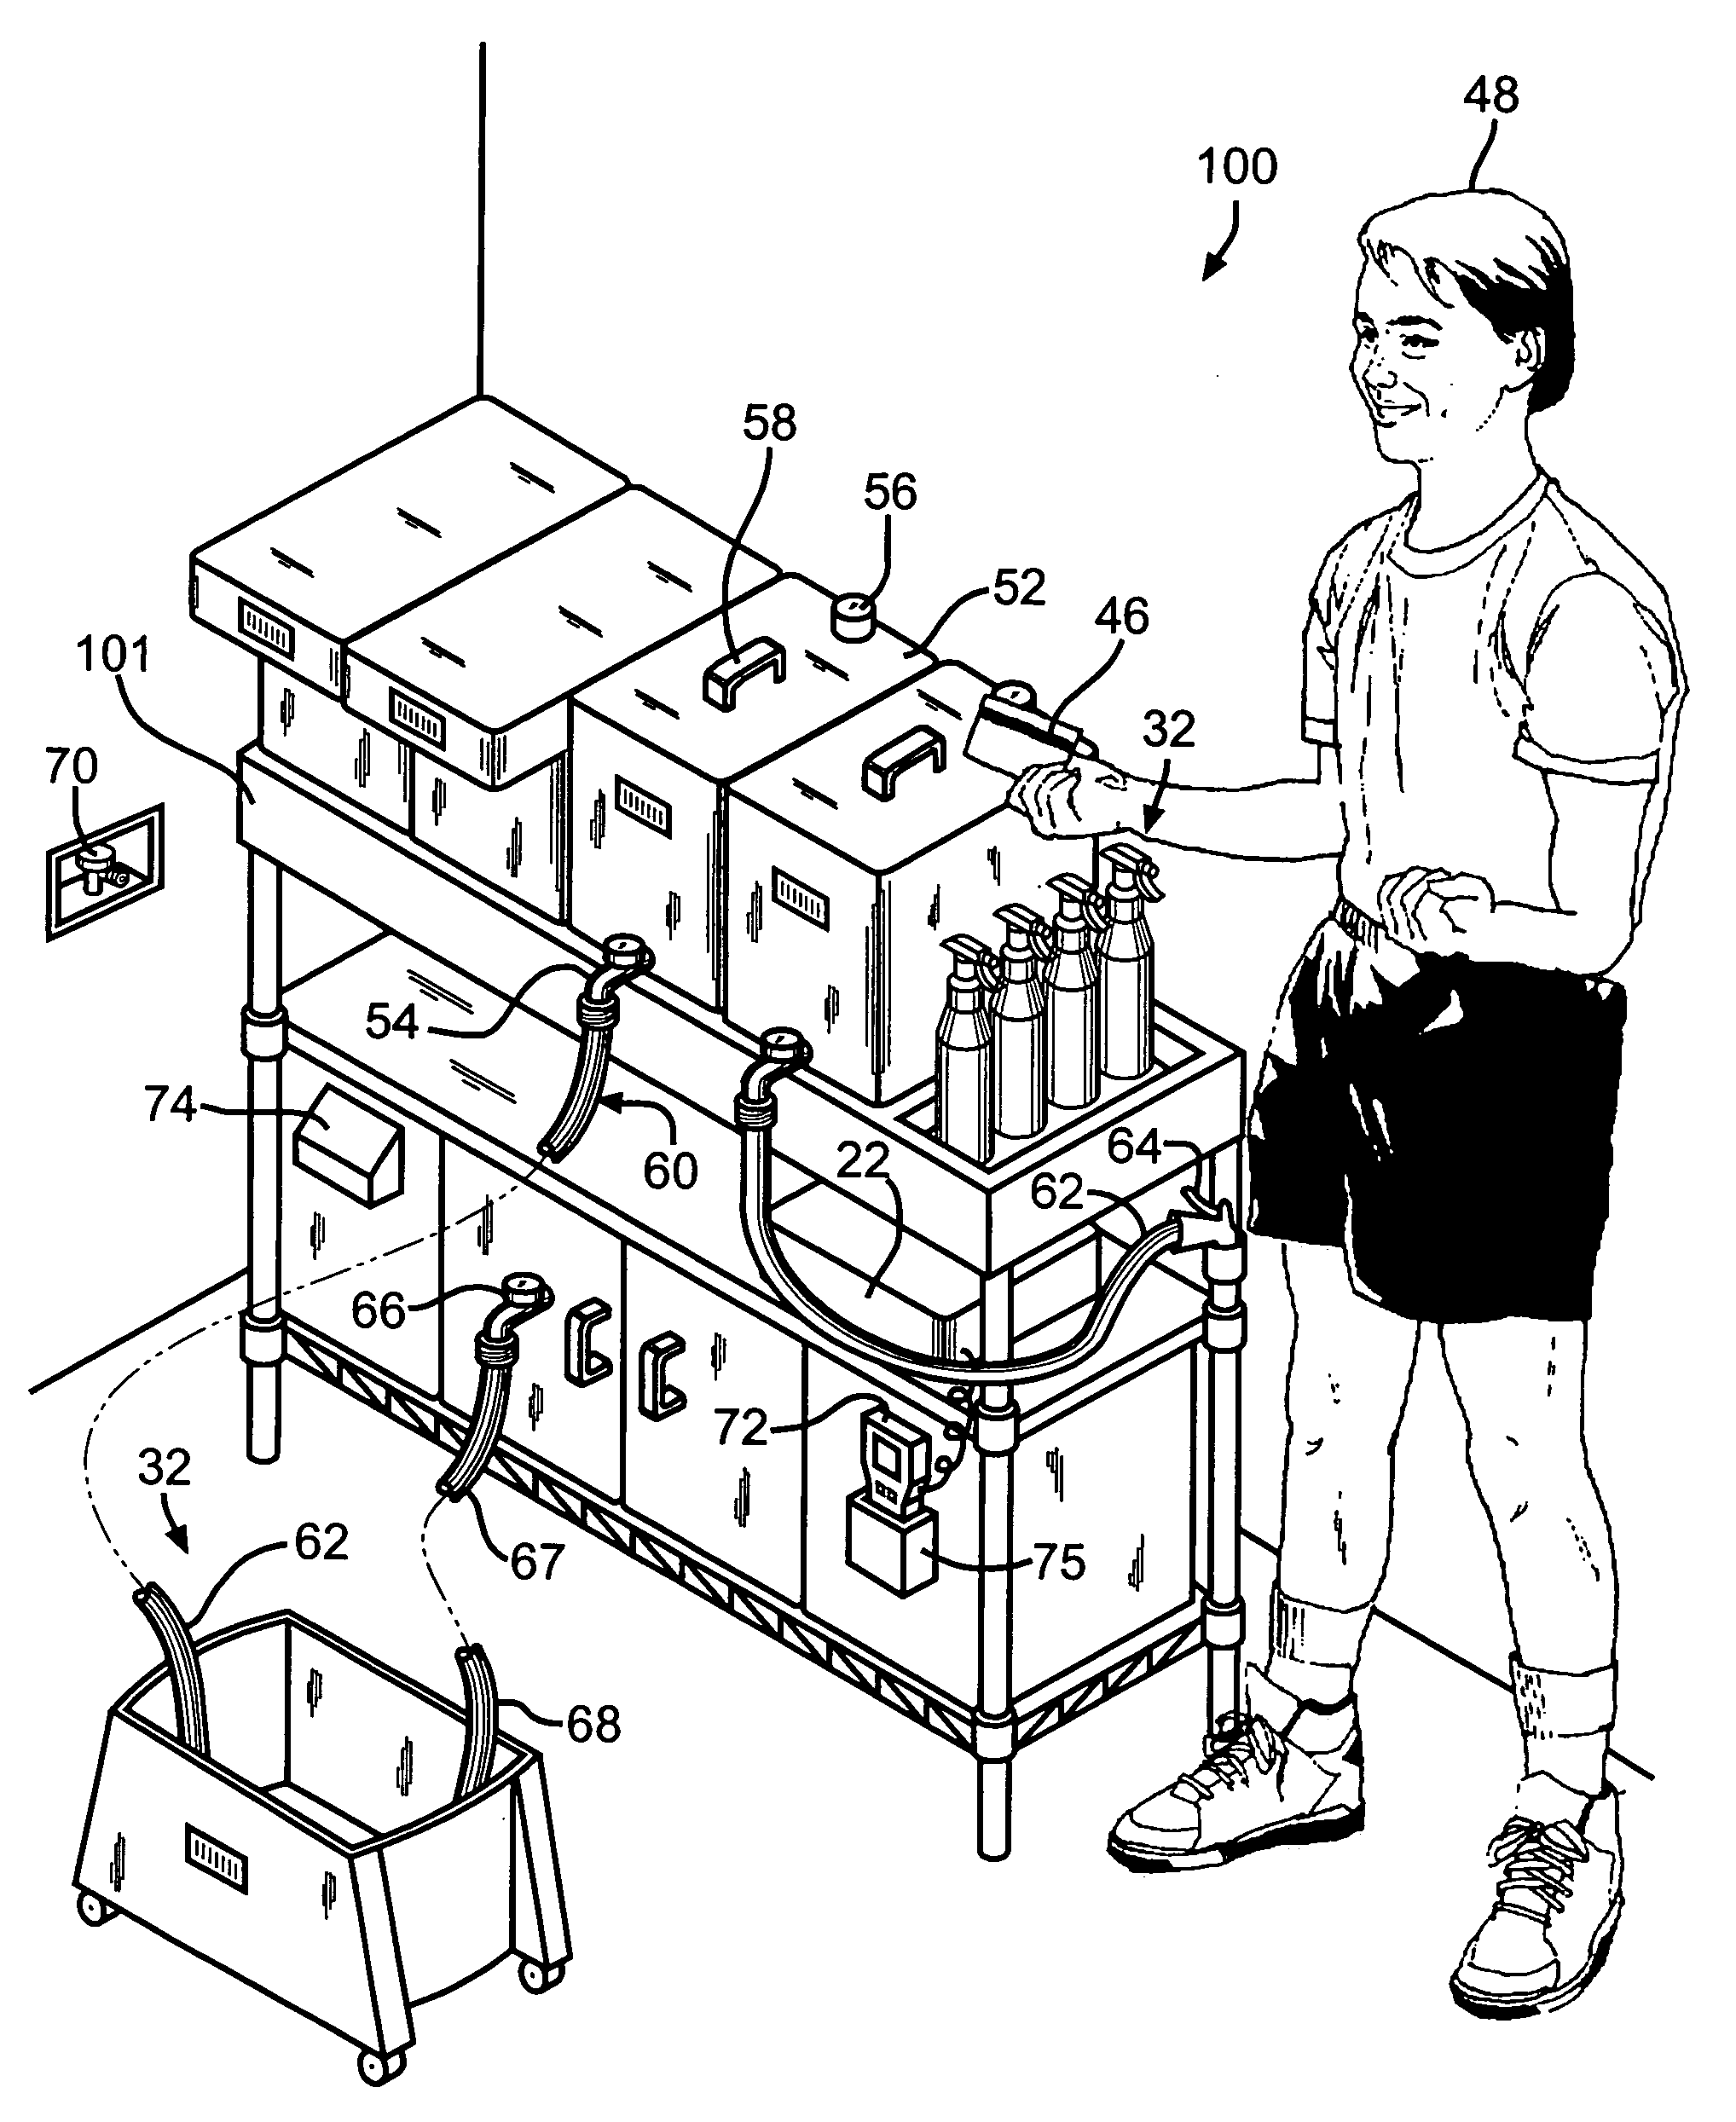 Apparatus for dispensing a substance